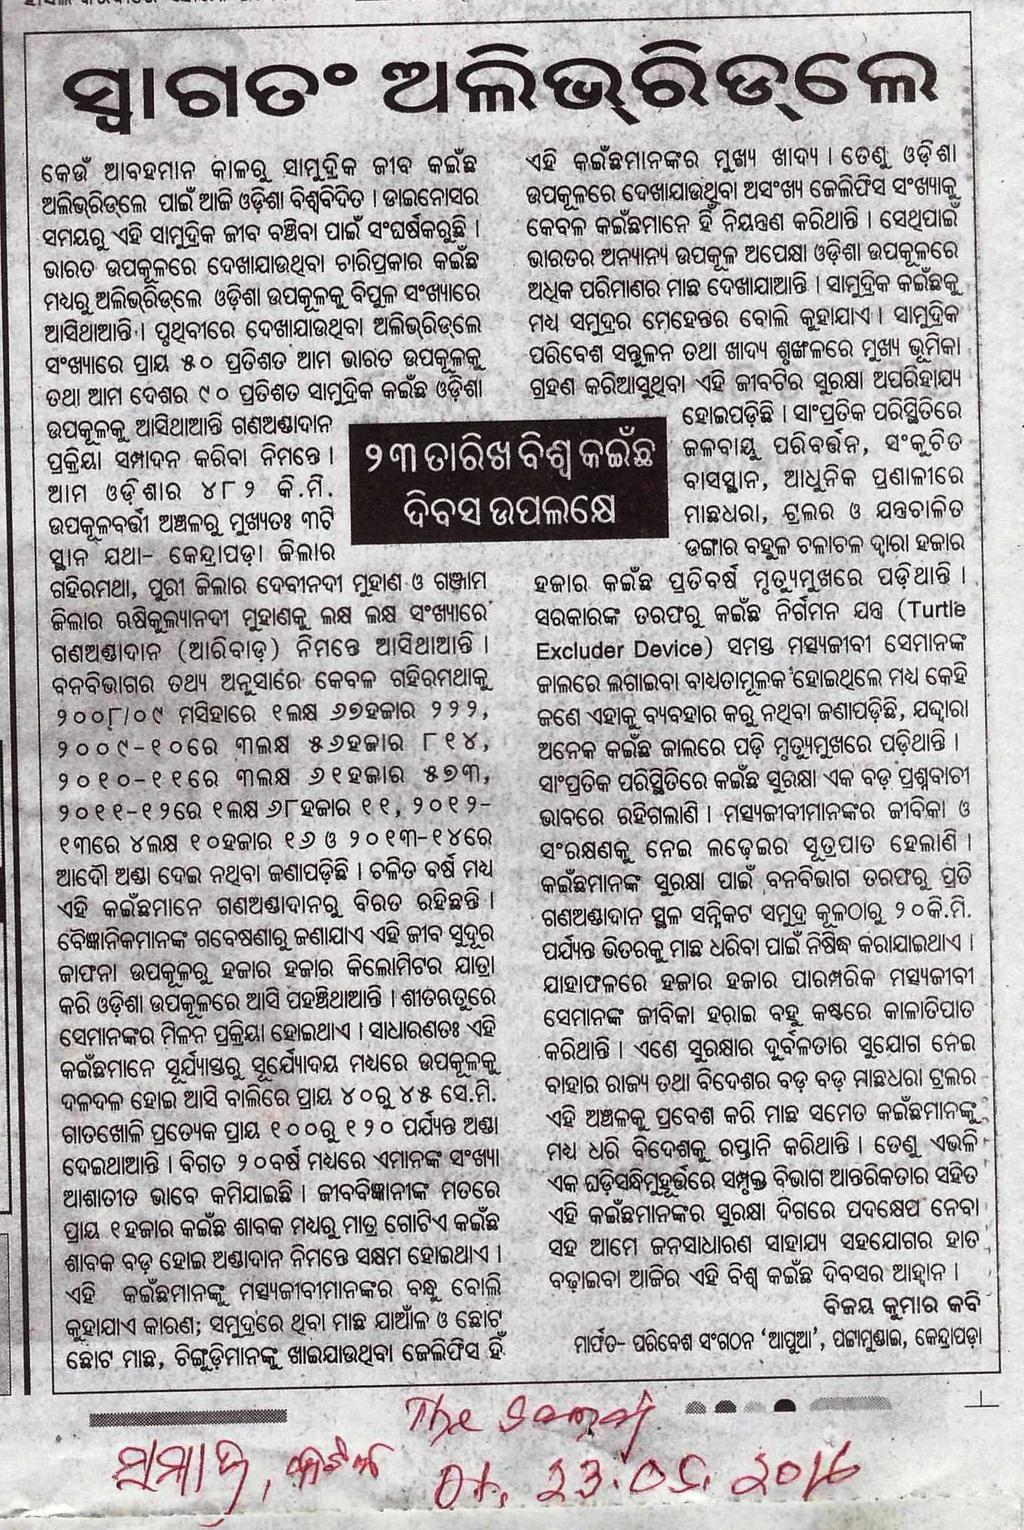 Publication- The Samaj (an odia daily newspaper), Date-23 rd May, 2016, Place- Cuttack Many Challenges for Olive Ridleys in Odisha Coast Although Odisha coast is considered worlds largest nesting